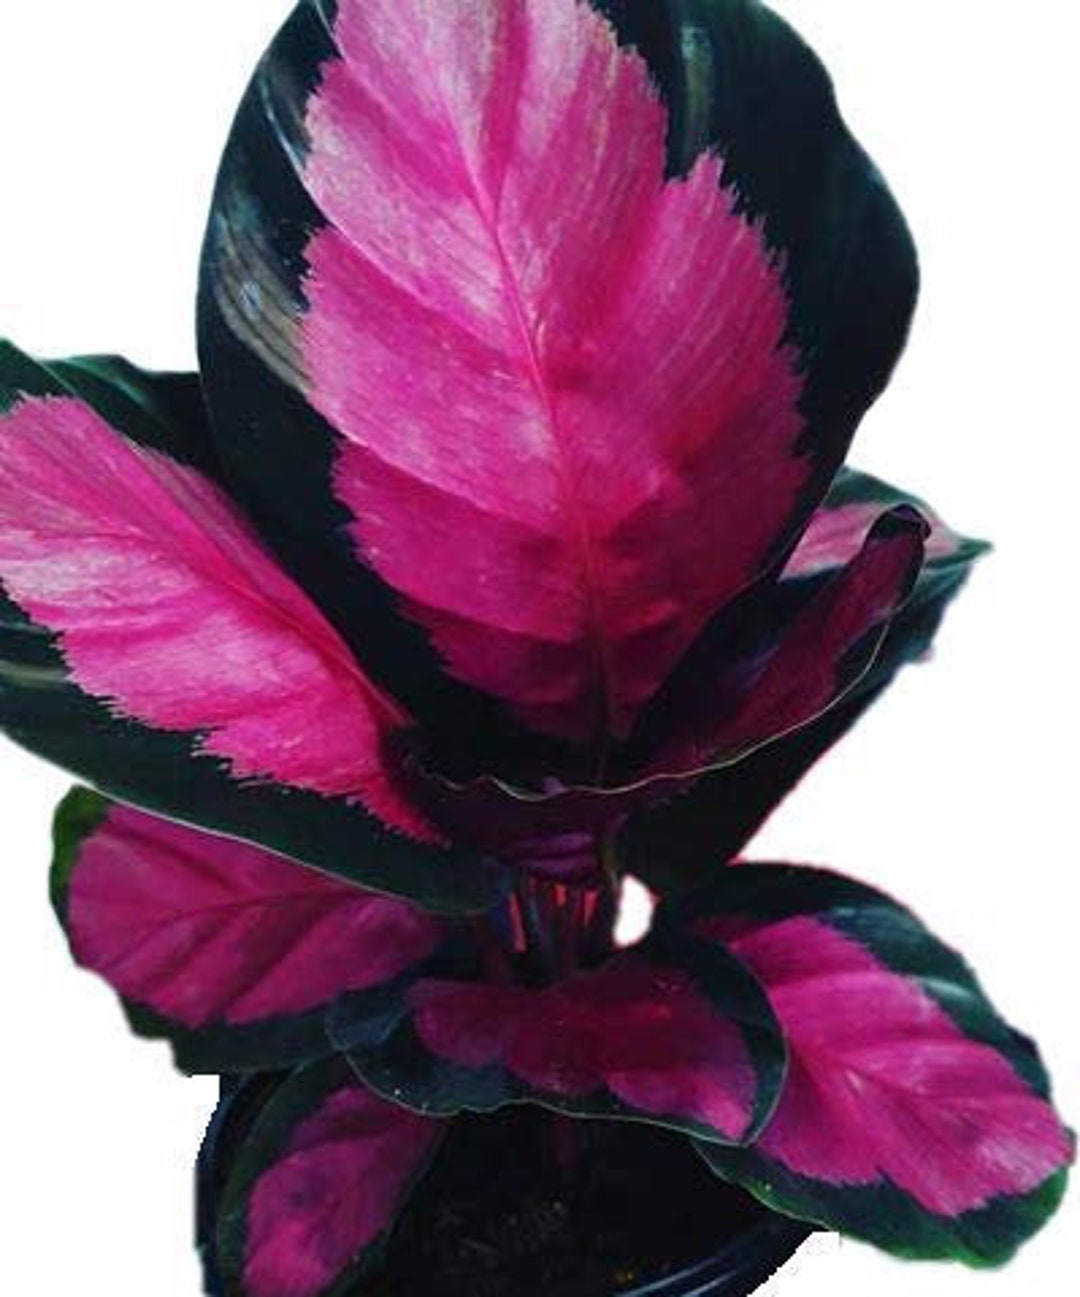 Calathea Roseopicta Rosy / Rose Painted 20 20 in TALL live   Etsy.de